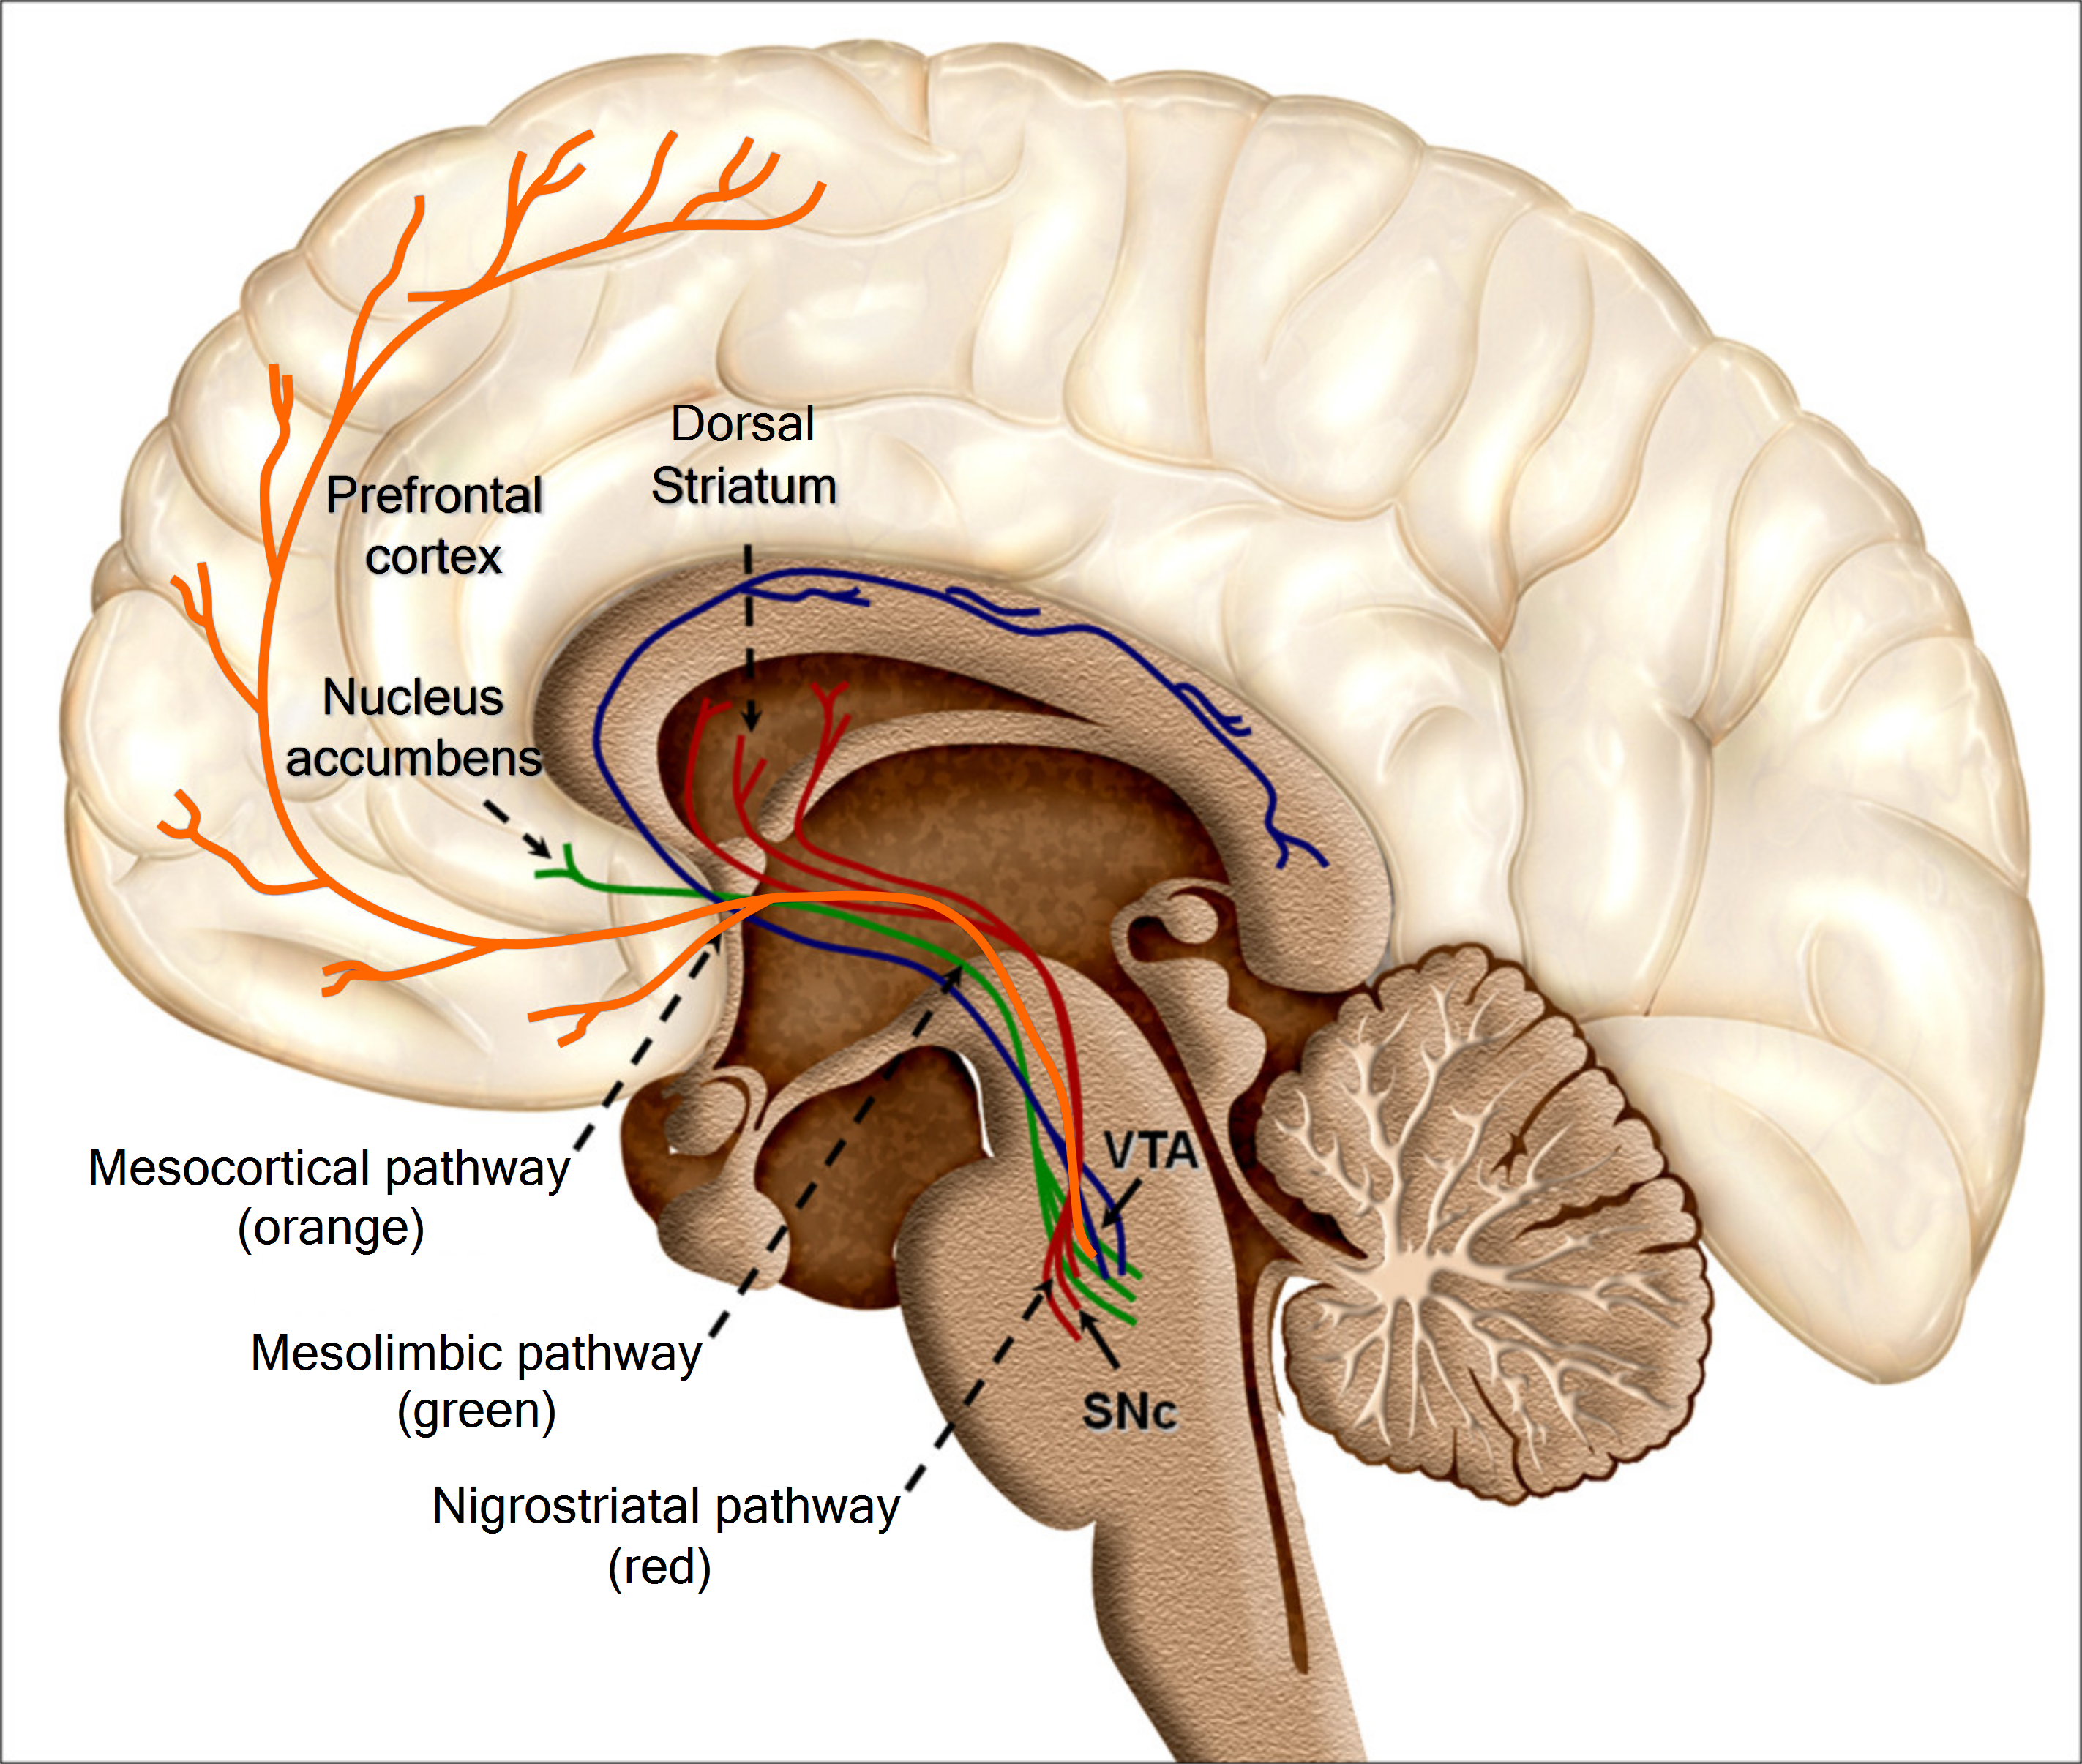 Mesolimbic, "Reward" Circuit and other Dopamine Pathways including from both the Substantia Nigra (SNc) and Ventral Tegmental Area (VTA) to forebrain targets such as the Nucleus Accumbens and Prefrontal Cortex.